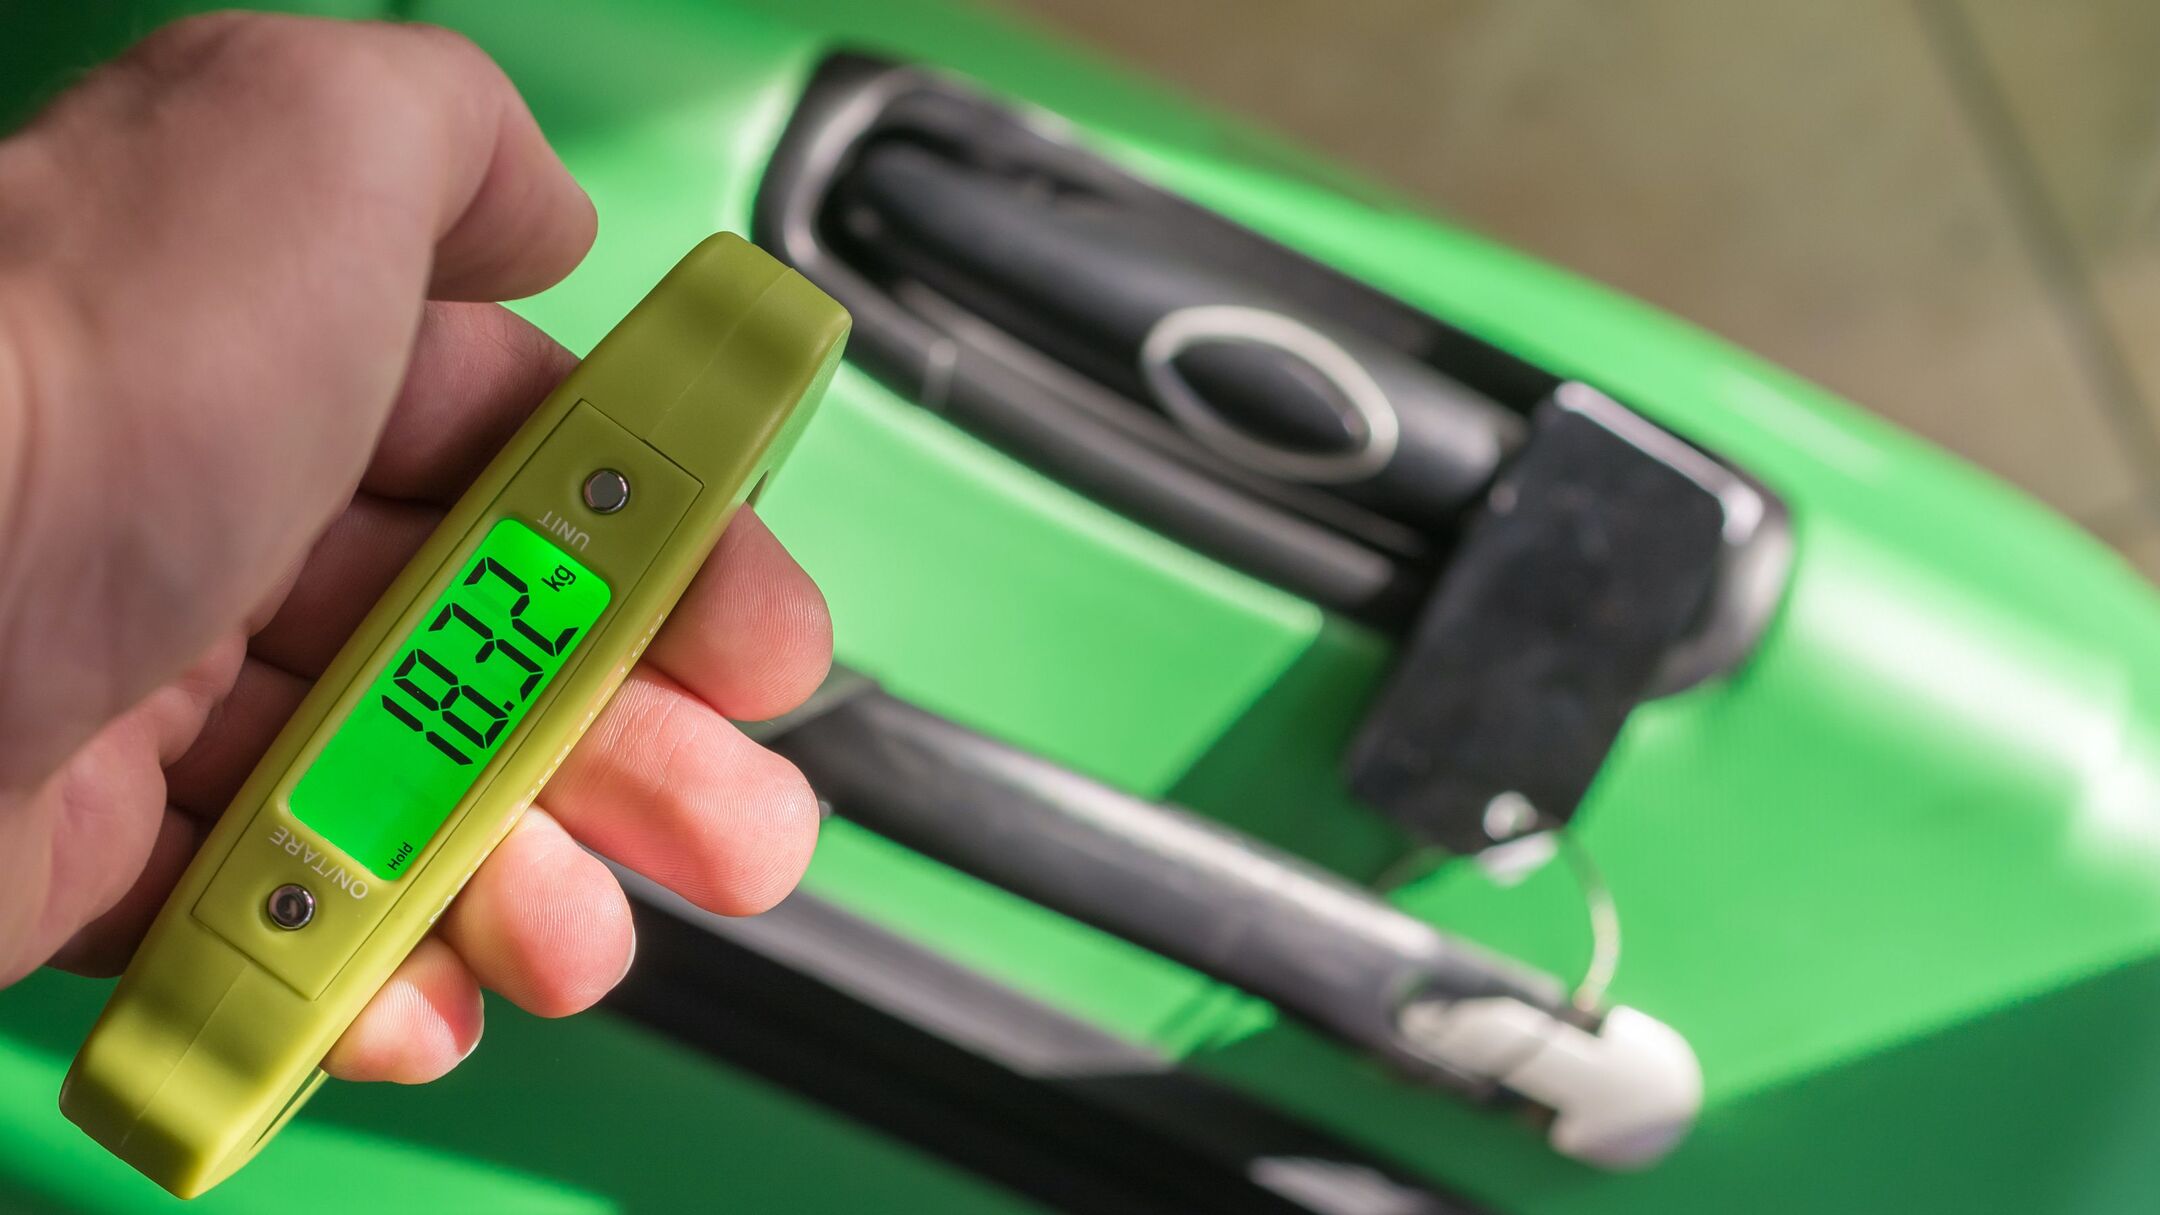 Digital Luggage Scale Review: Compact and Reliable Travel Companion